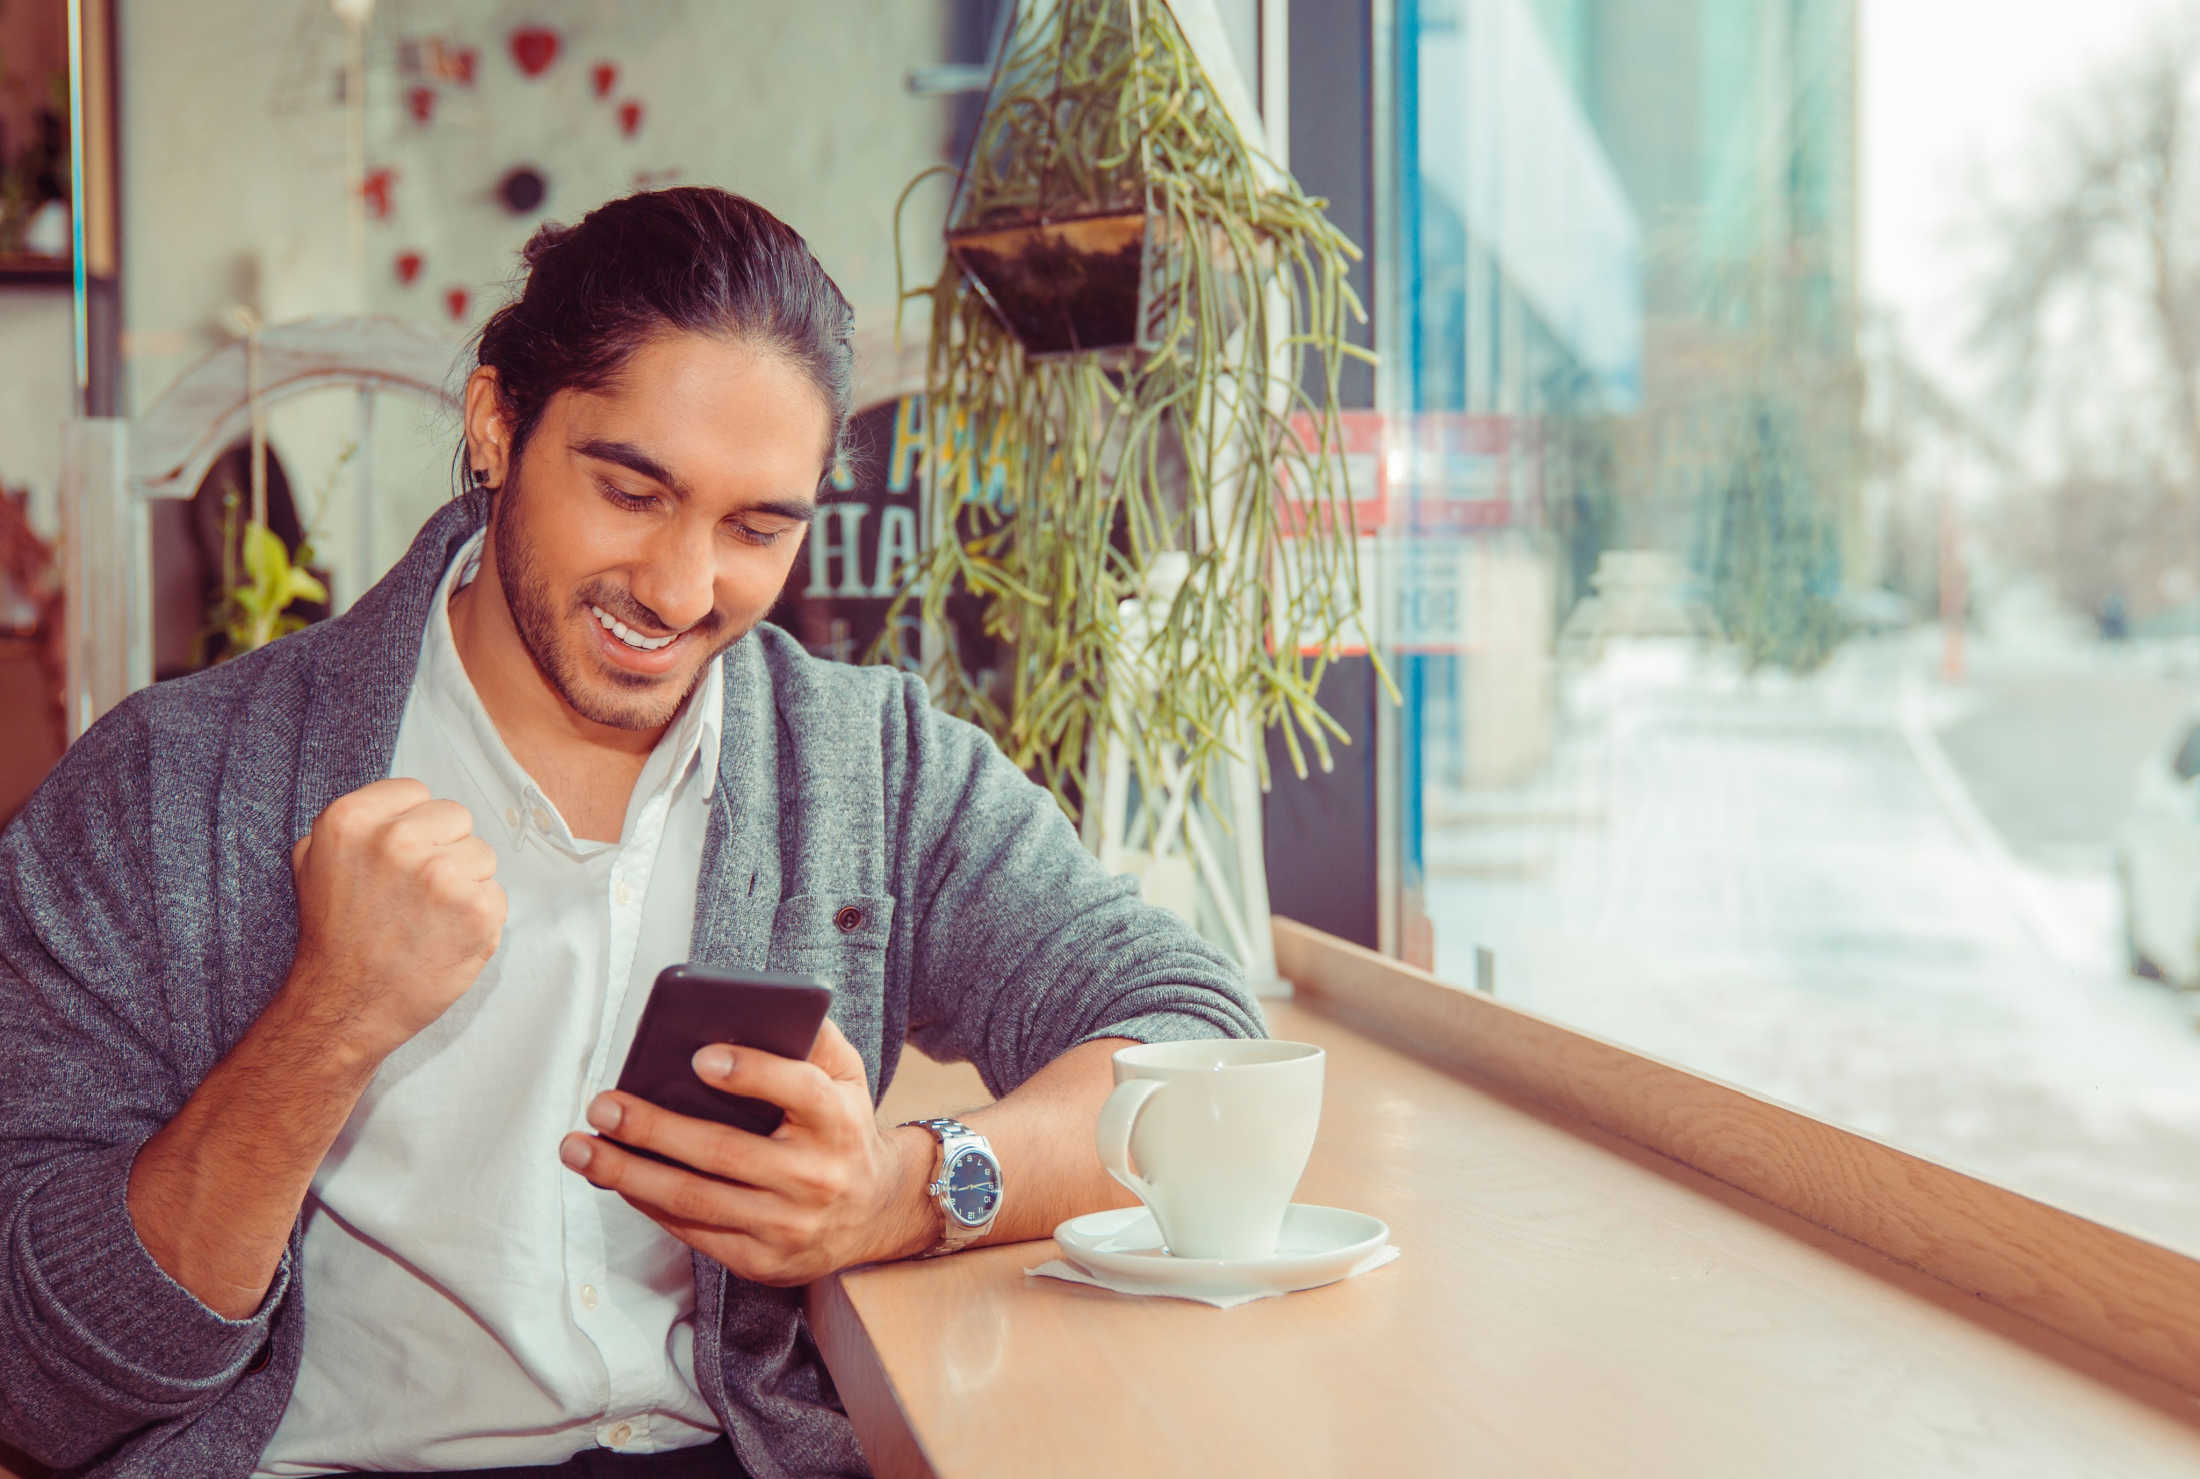 Happy young male professional using his smartphone while enjoying a coffee at a cafe bar.